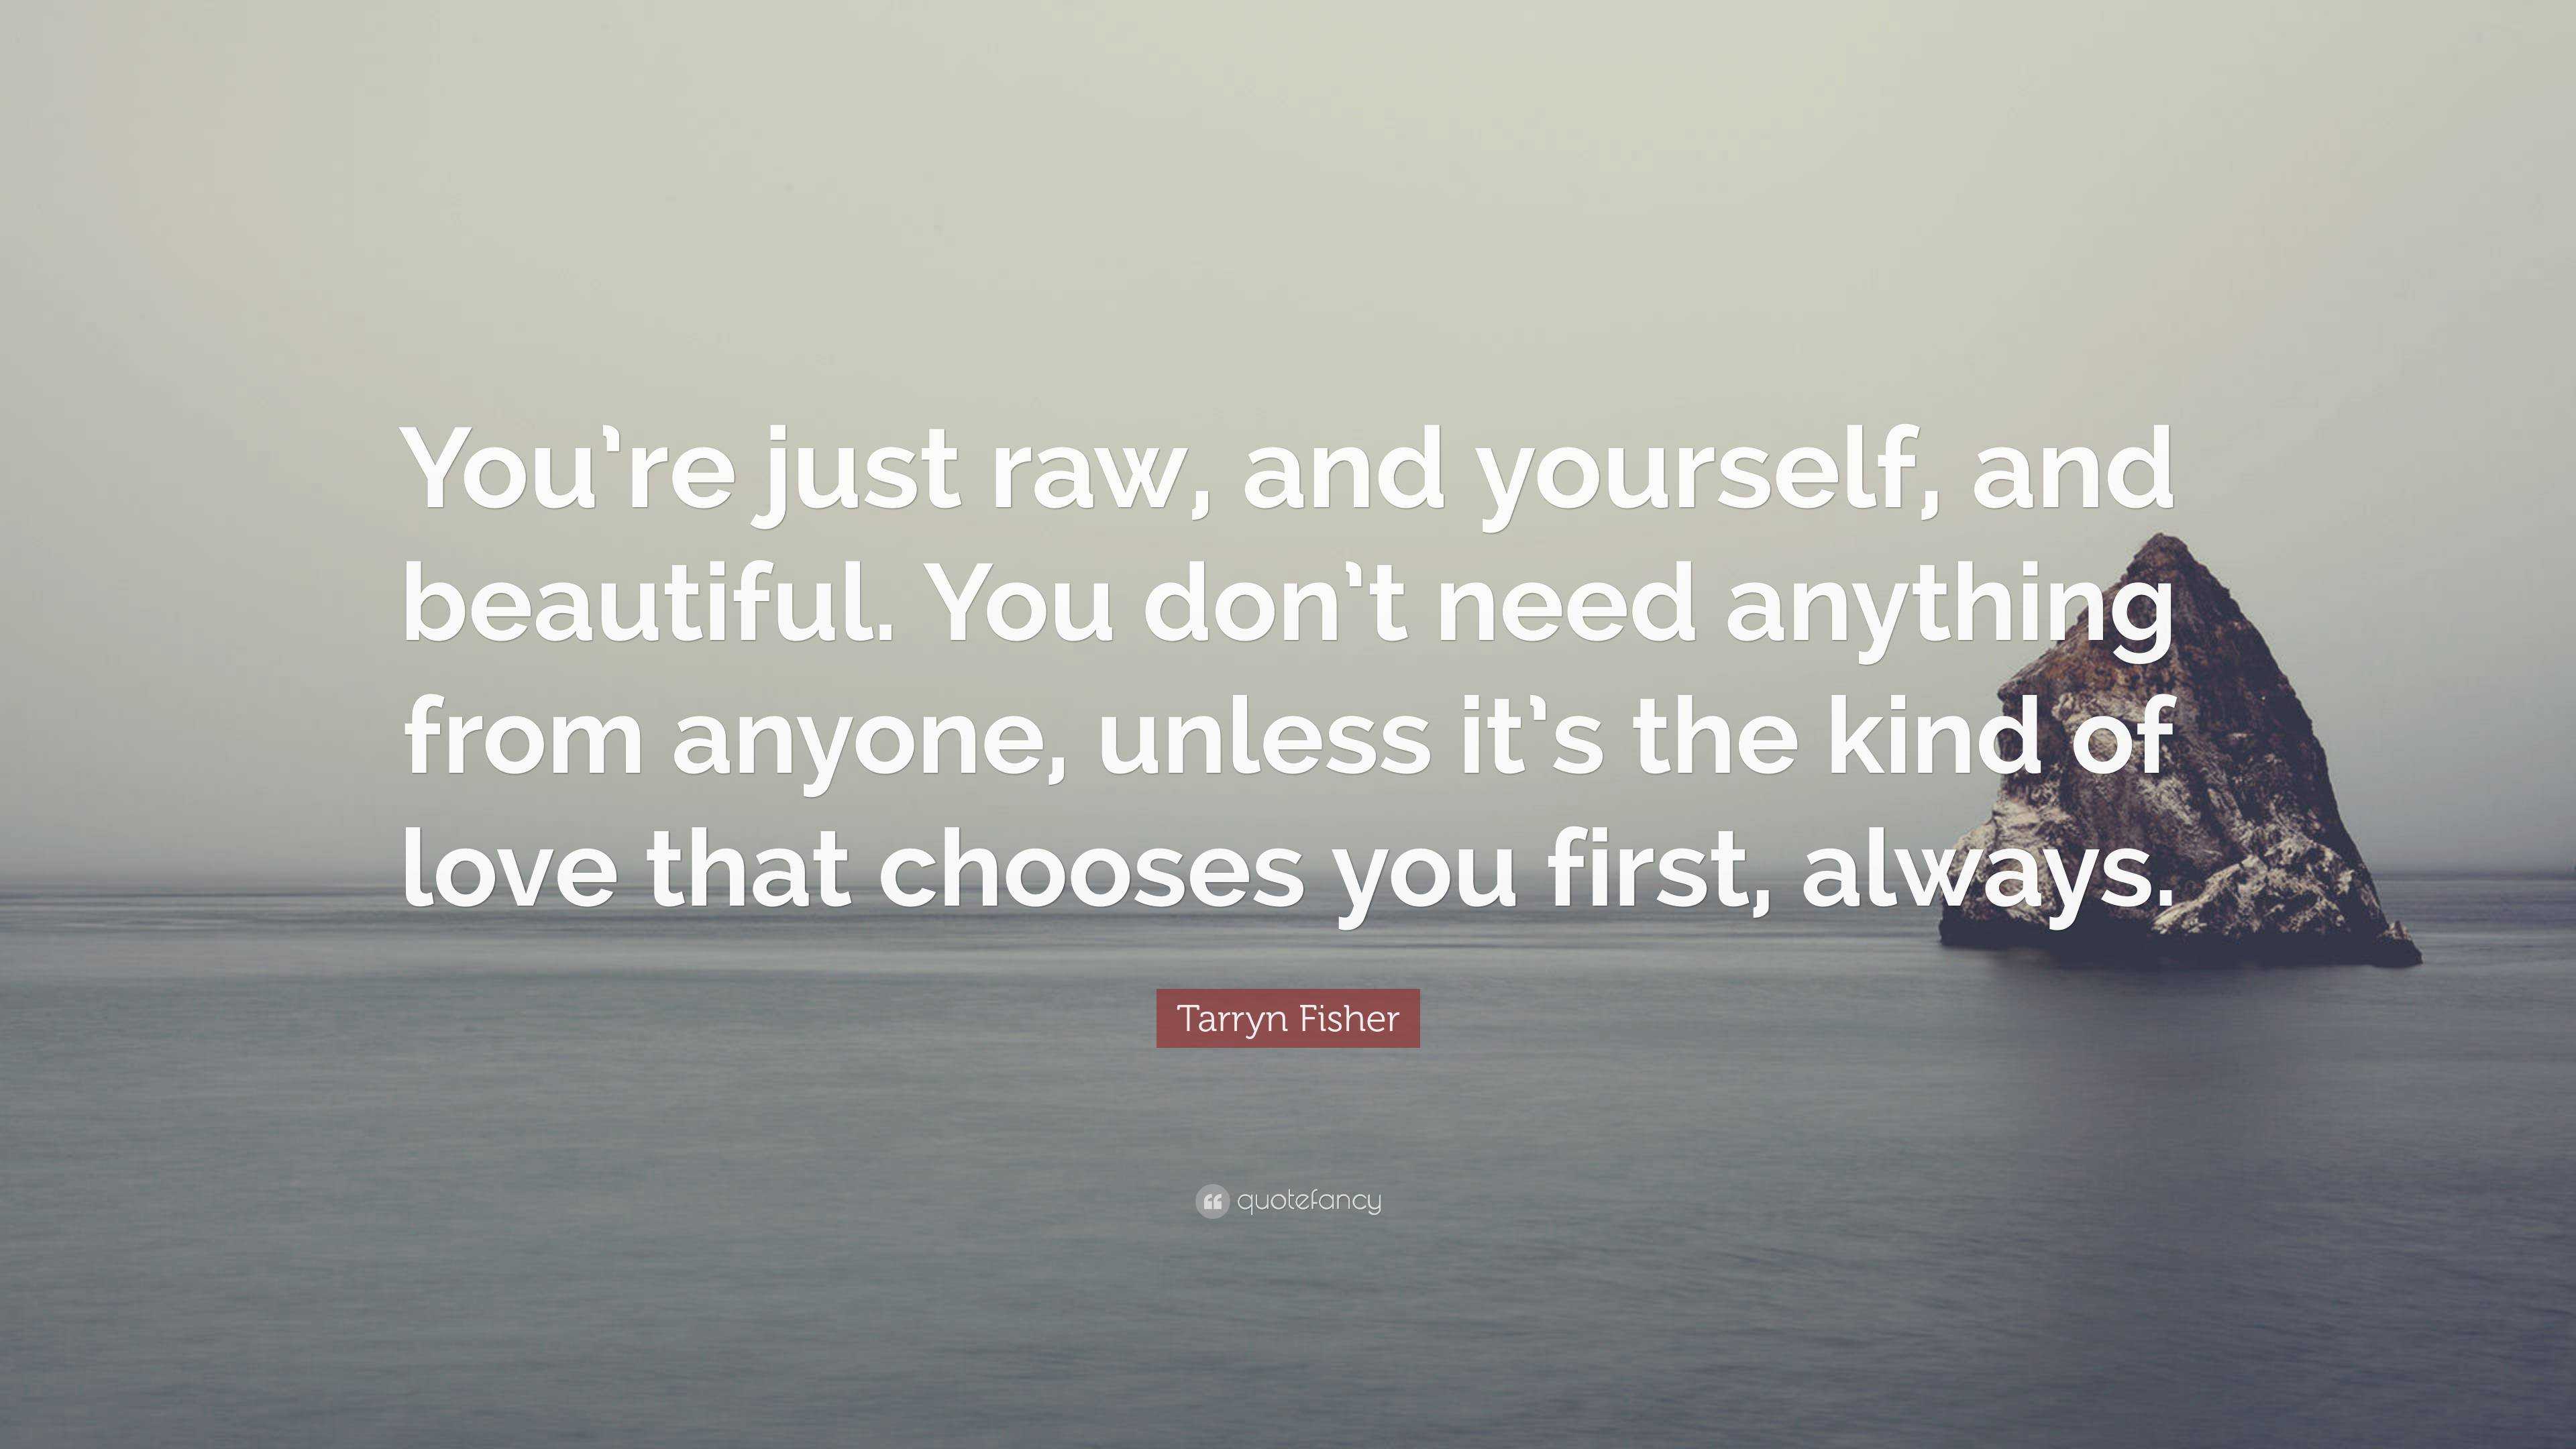 Tarryn Fisher Quote: “You’re just raw, and yourself, and beautiful. You ...